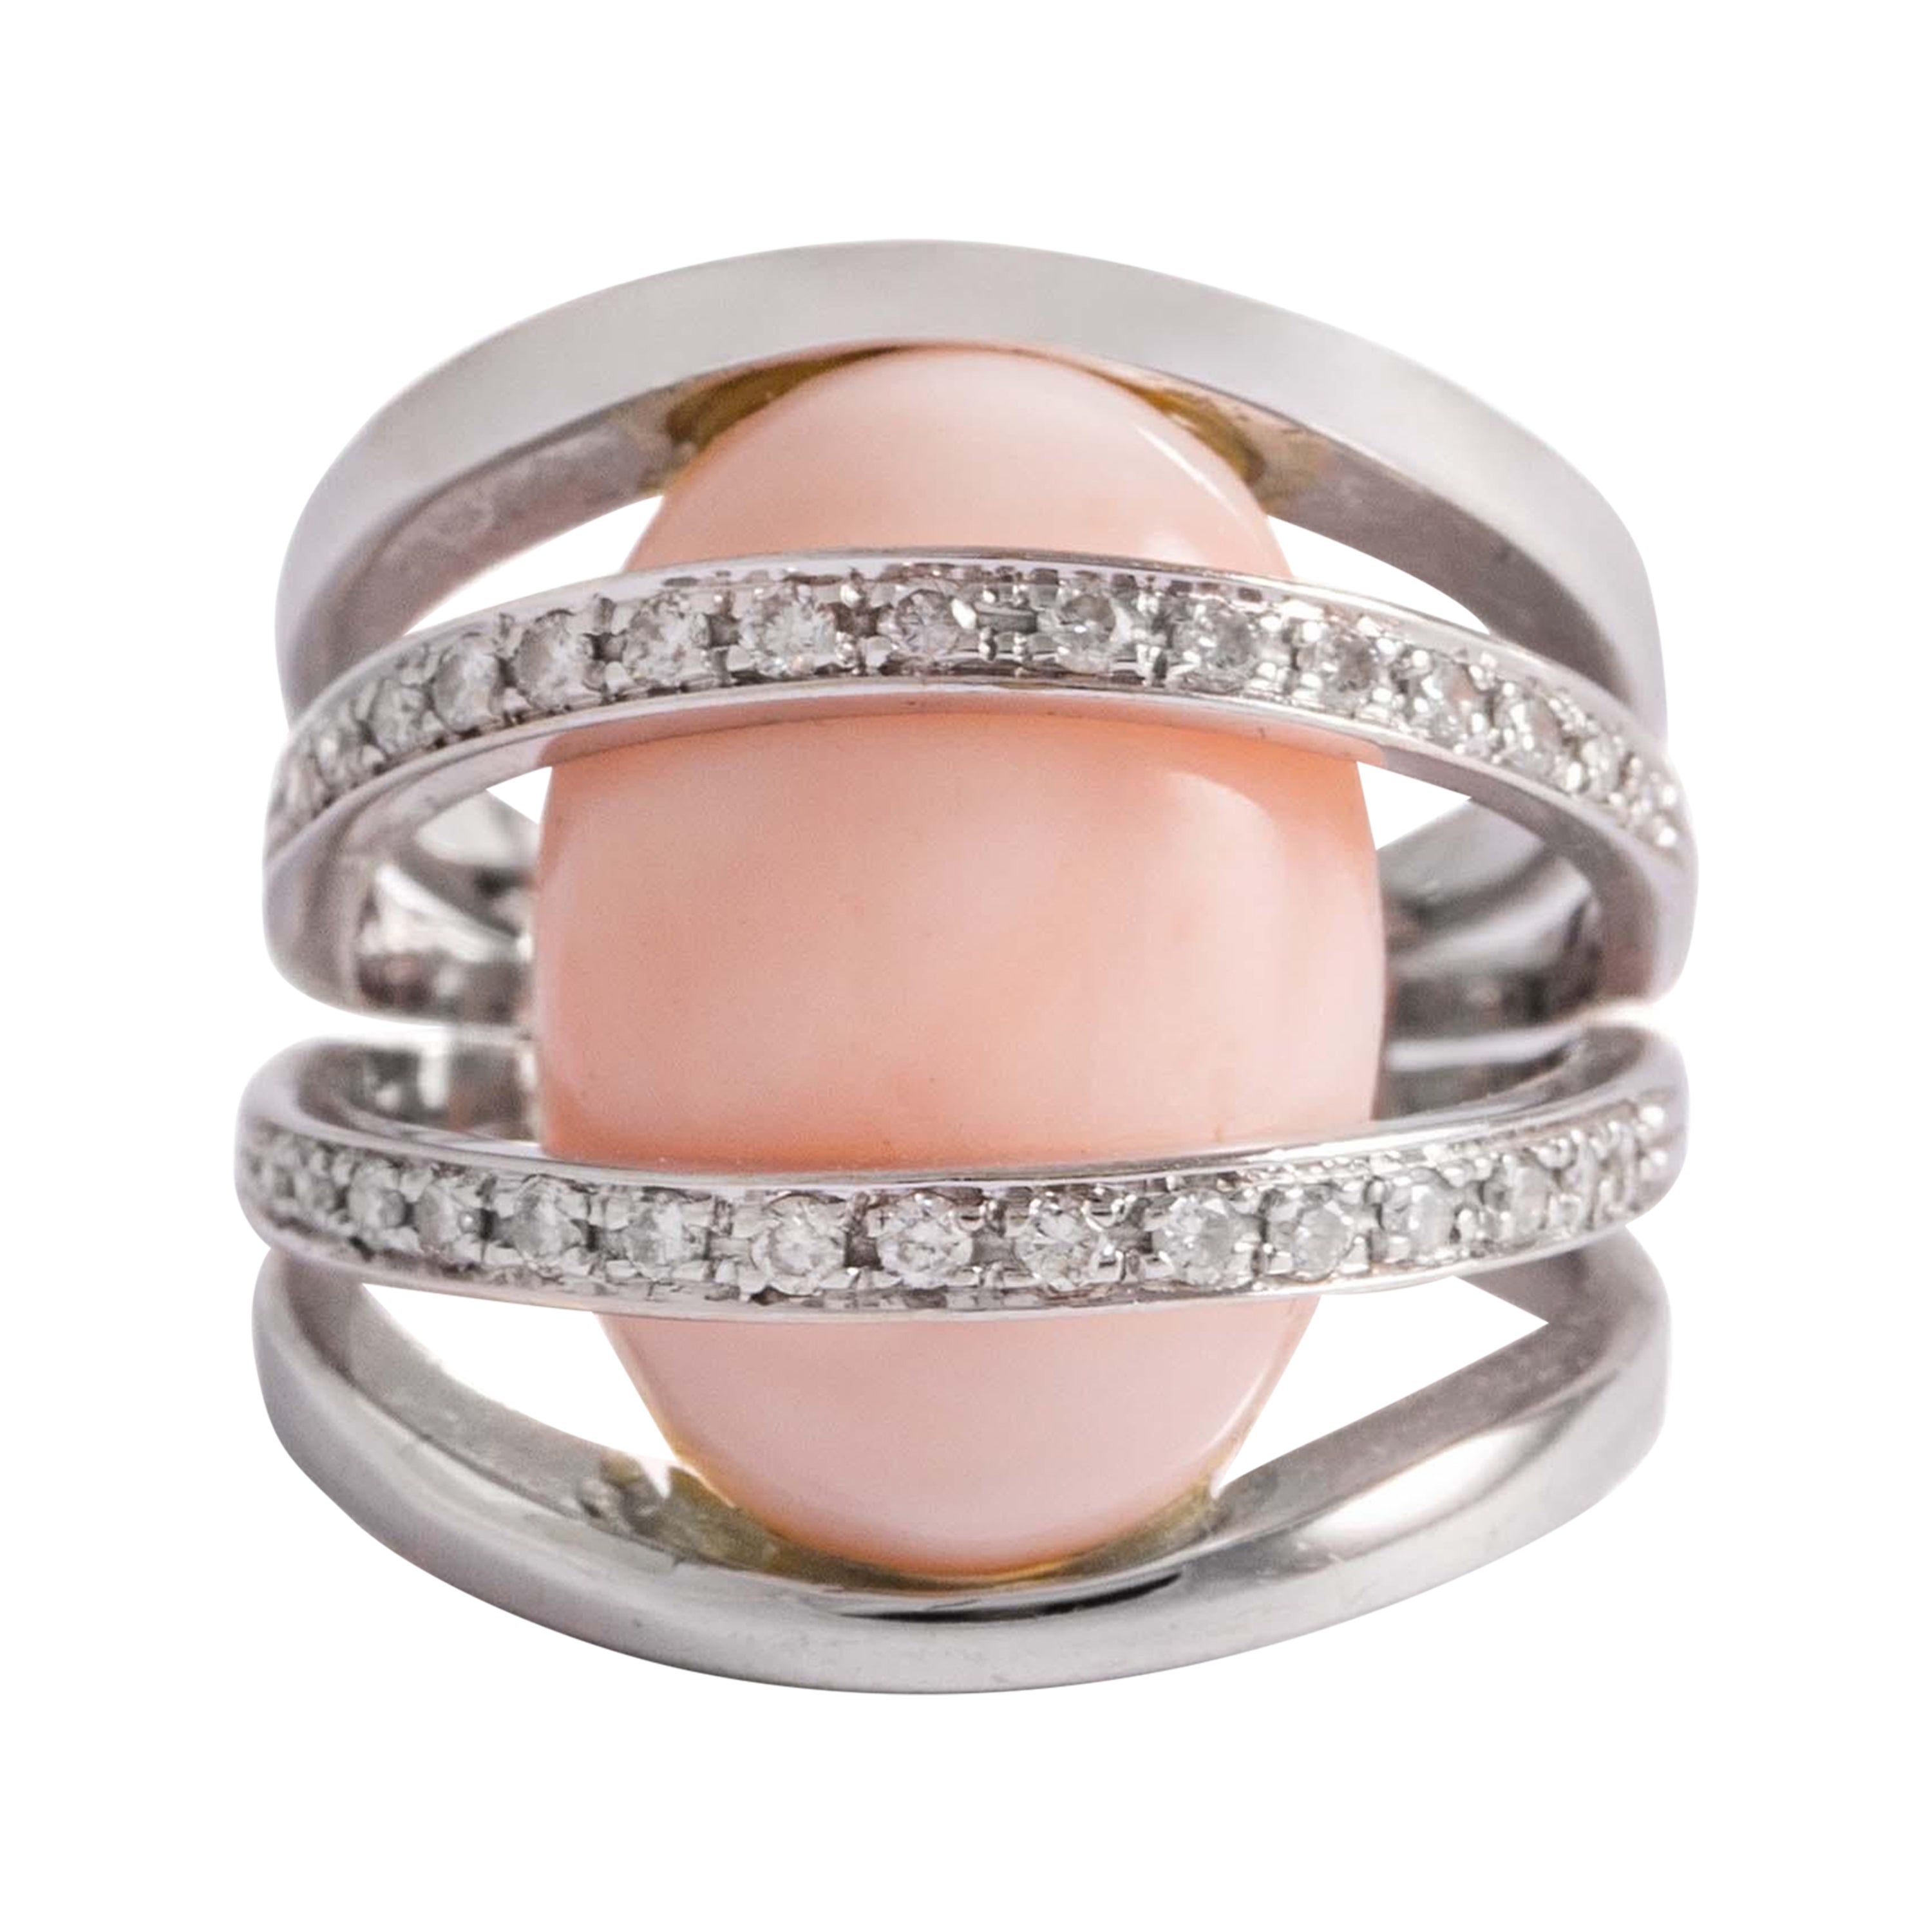 White Gold Ring Set with Round-Cut Diamonds and Holding a Pink Hardstone For Sale